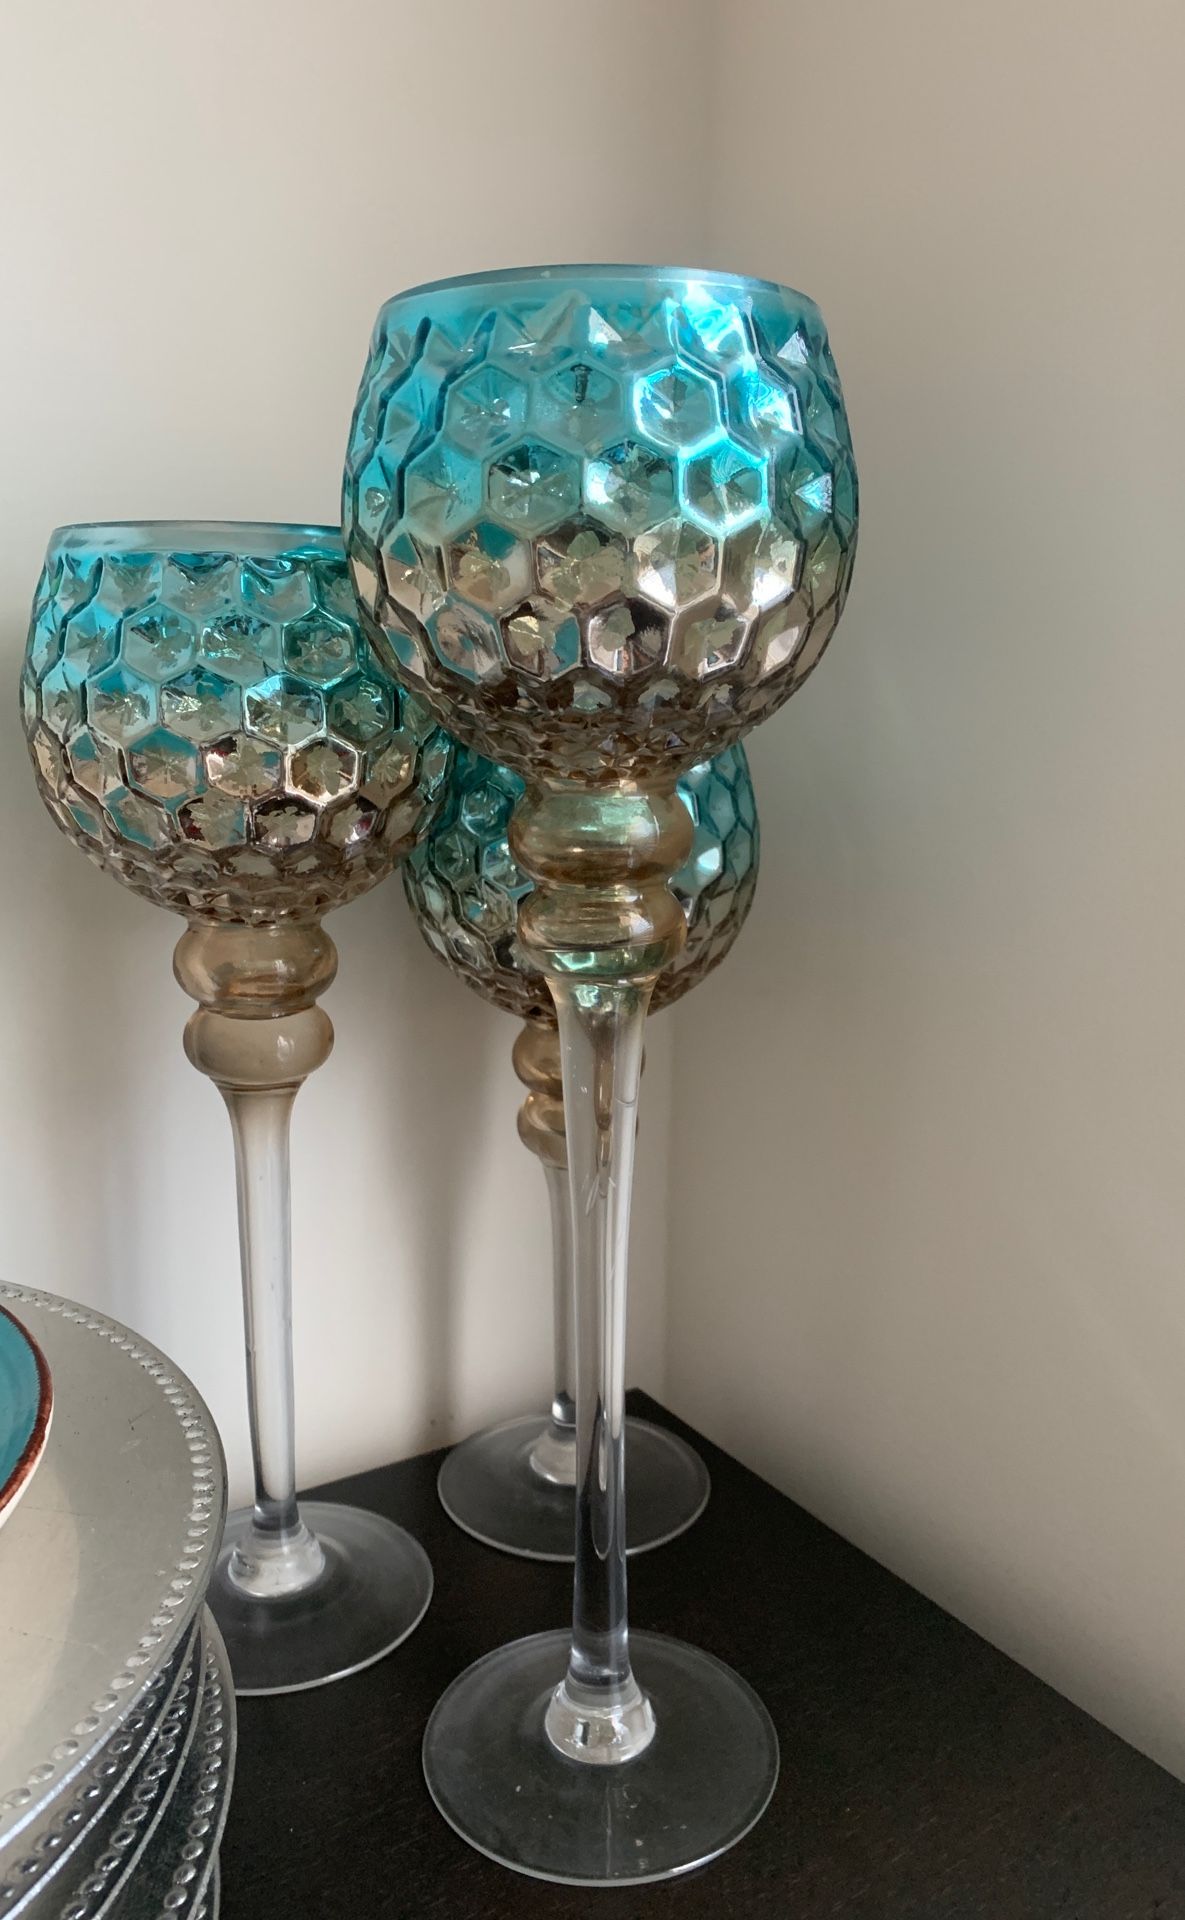 3 turquoise and gold candle holders